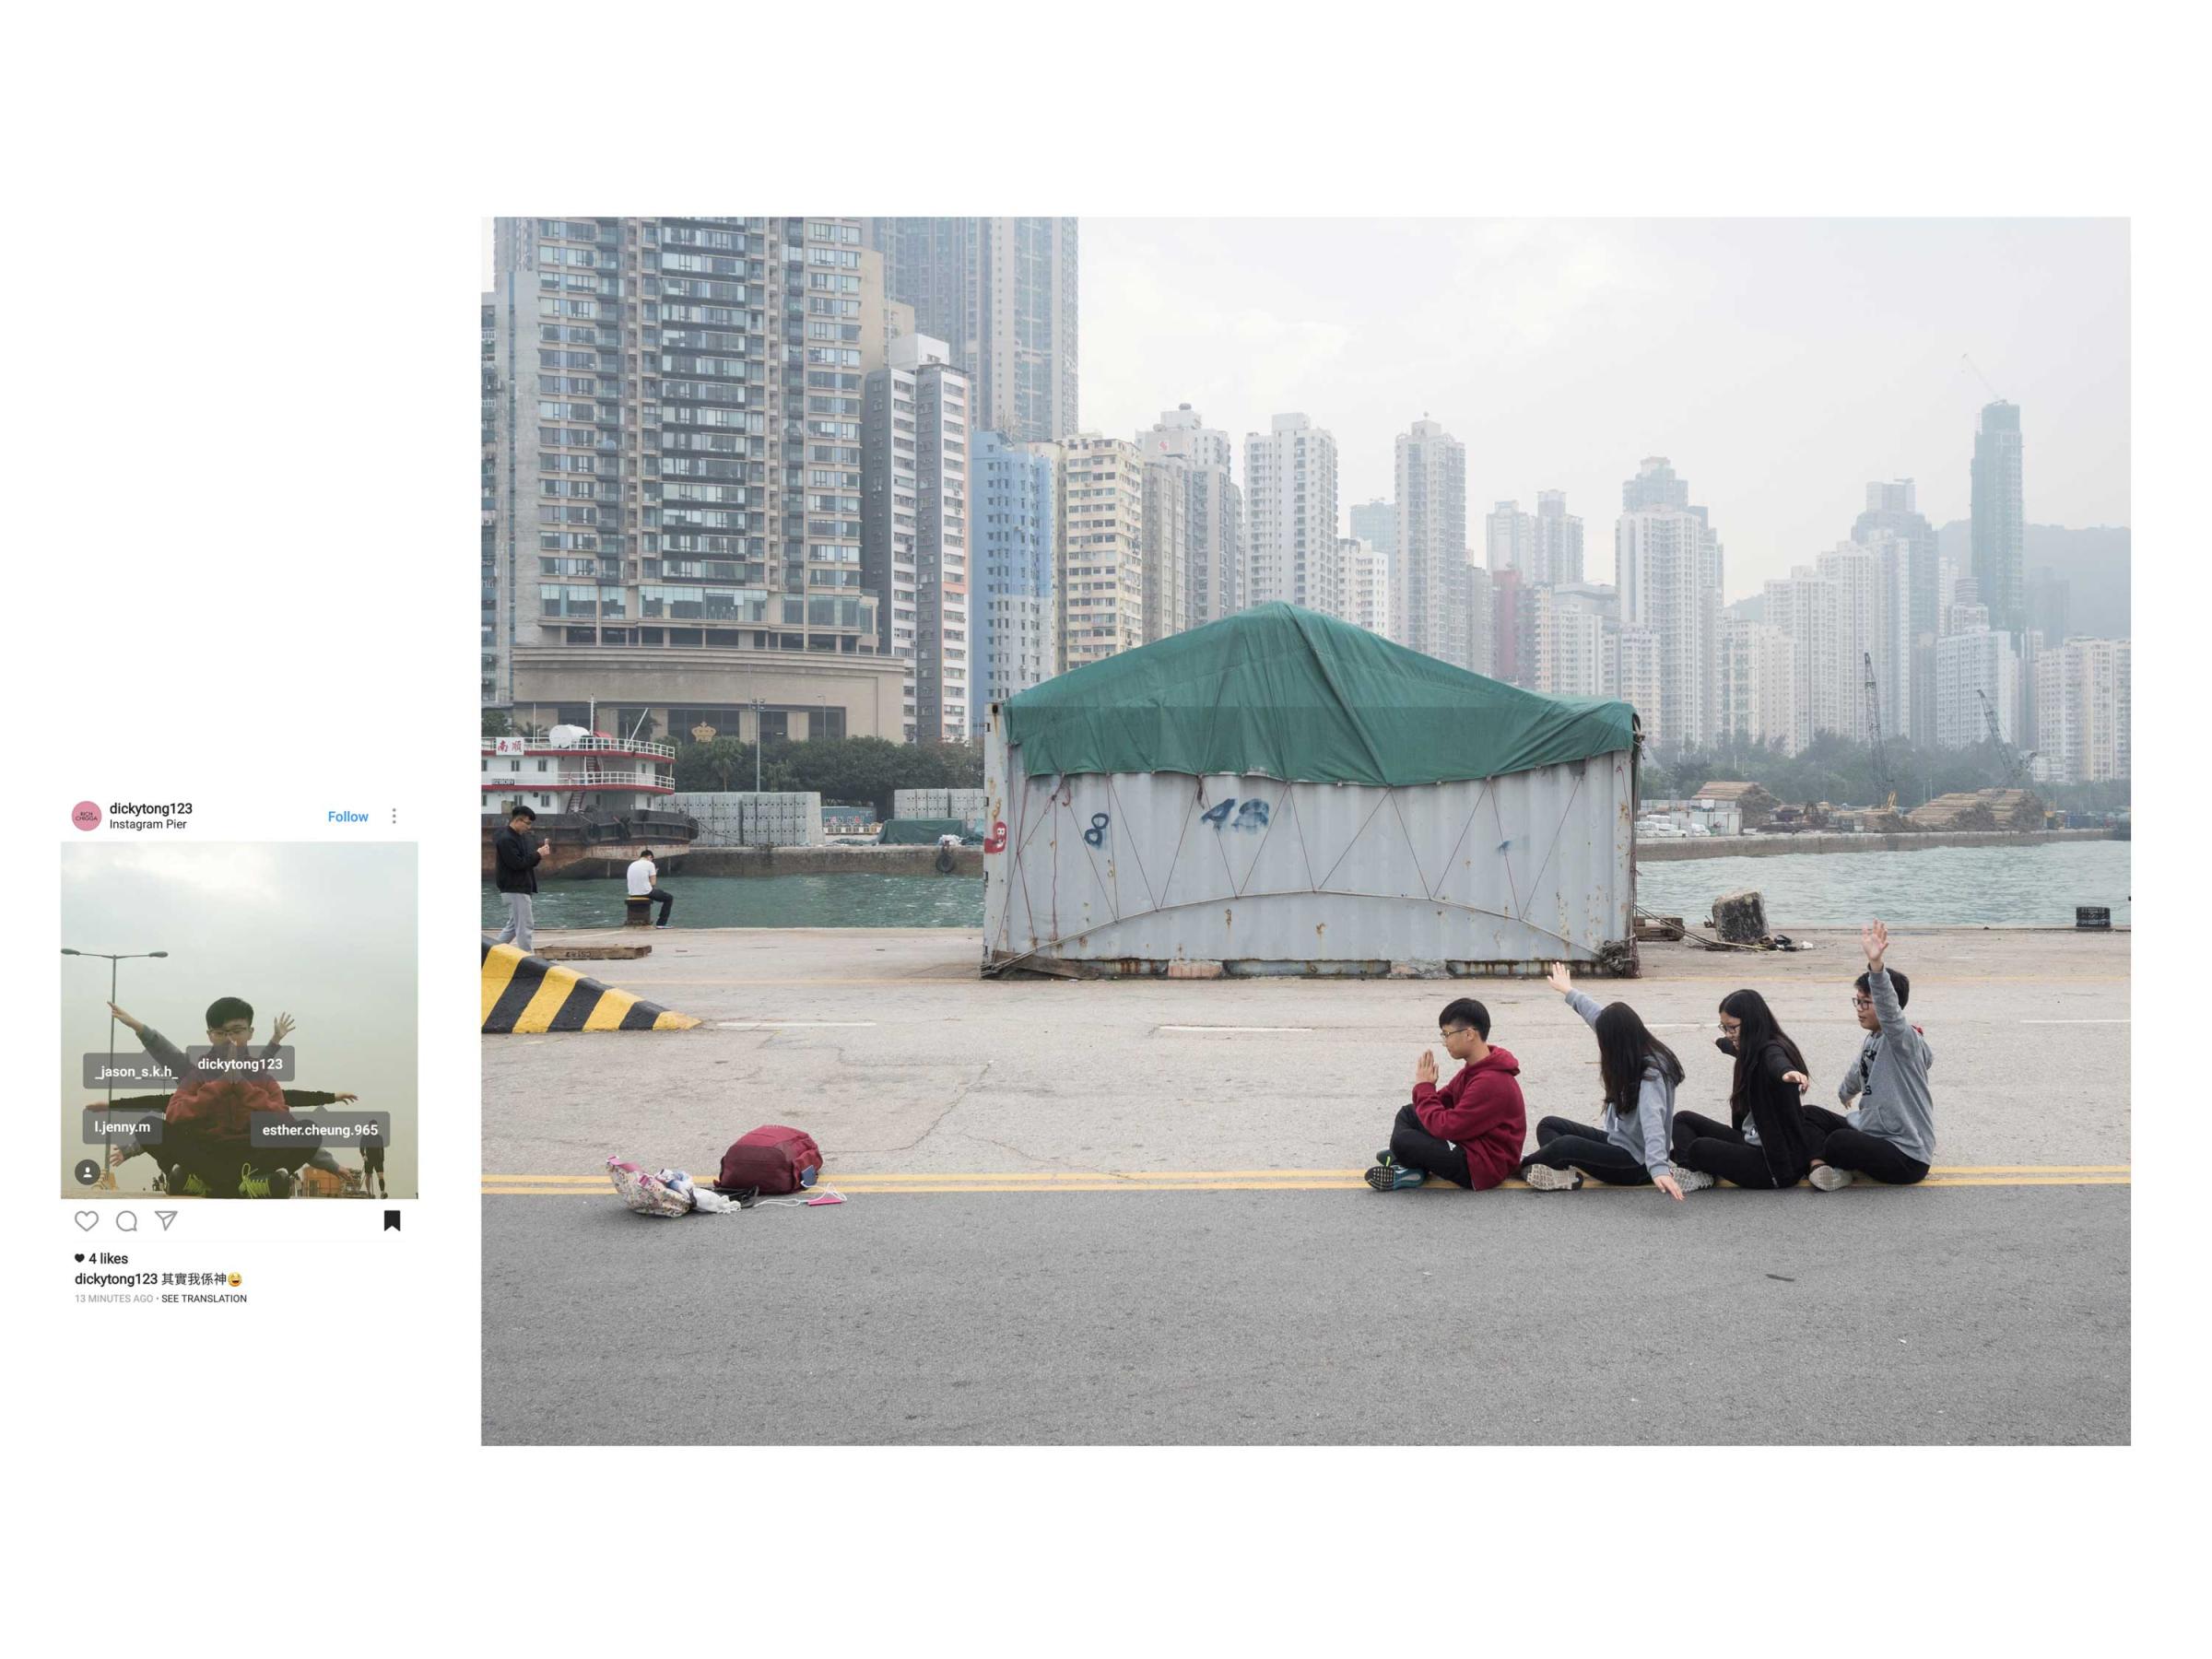 Four Instagram users take a photo on the "Instagram Pier" in Hong Kong.